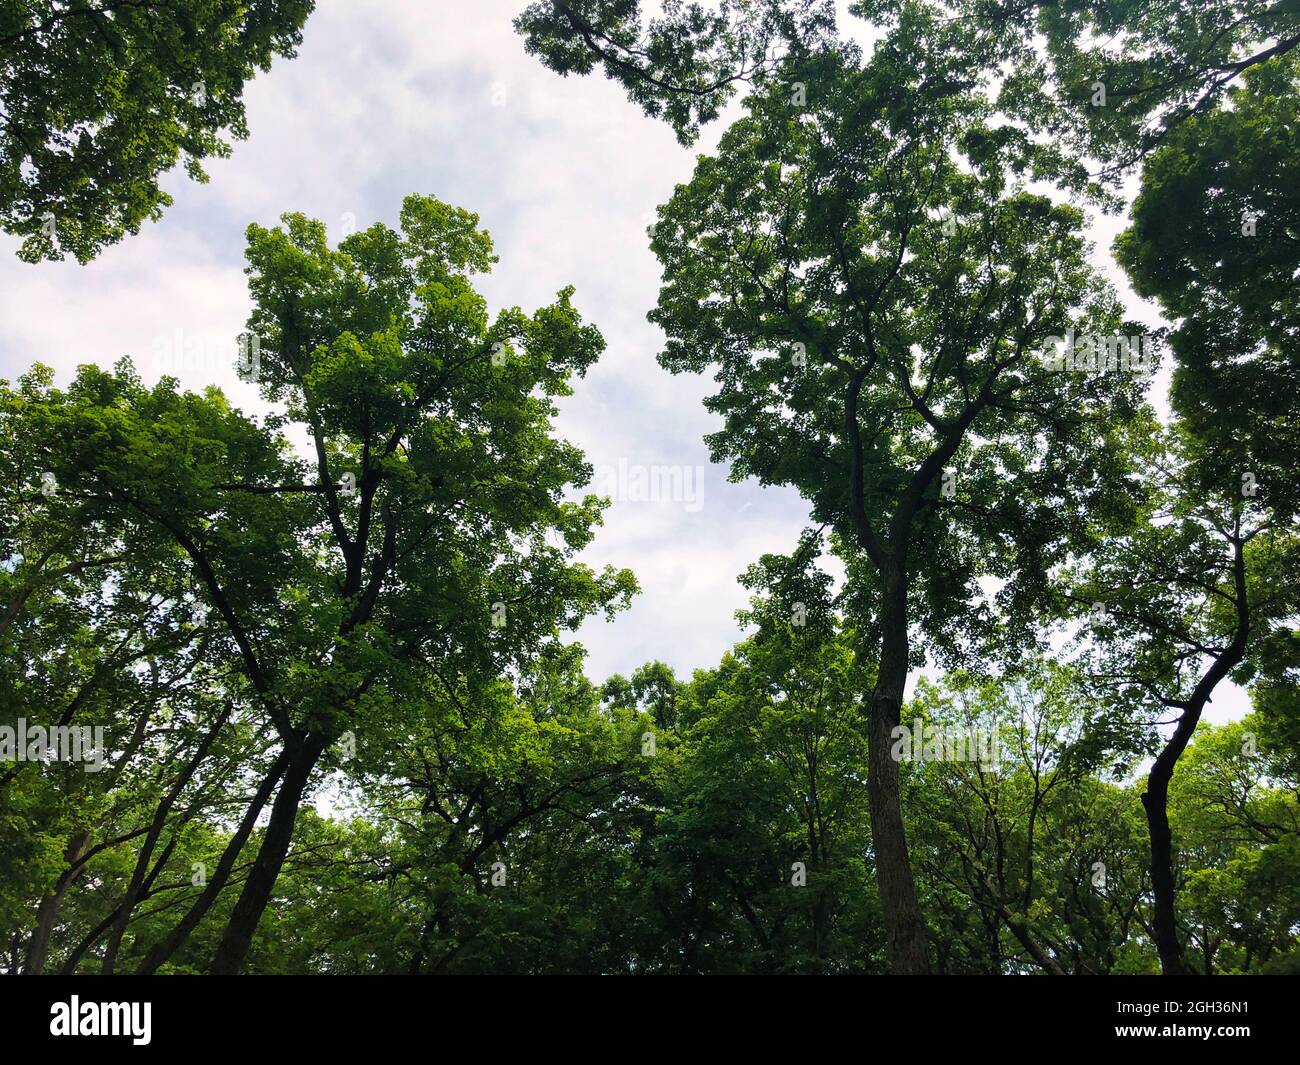 Trees in the Forest: Looking up through the tree canopy on a spectacular sunny summer day with trees showing full green leaves against blue sky Stock Photo